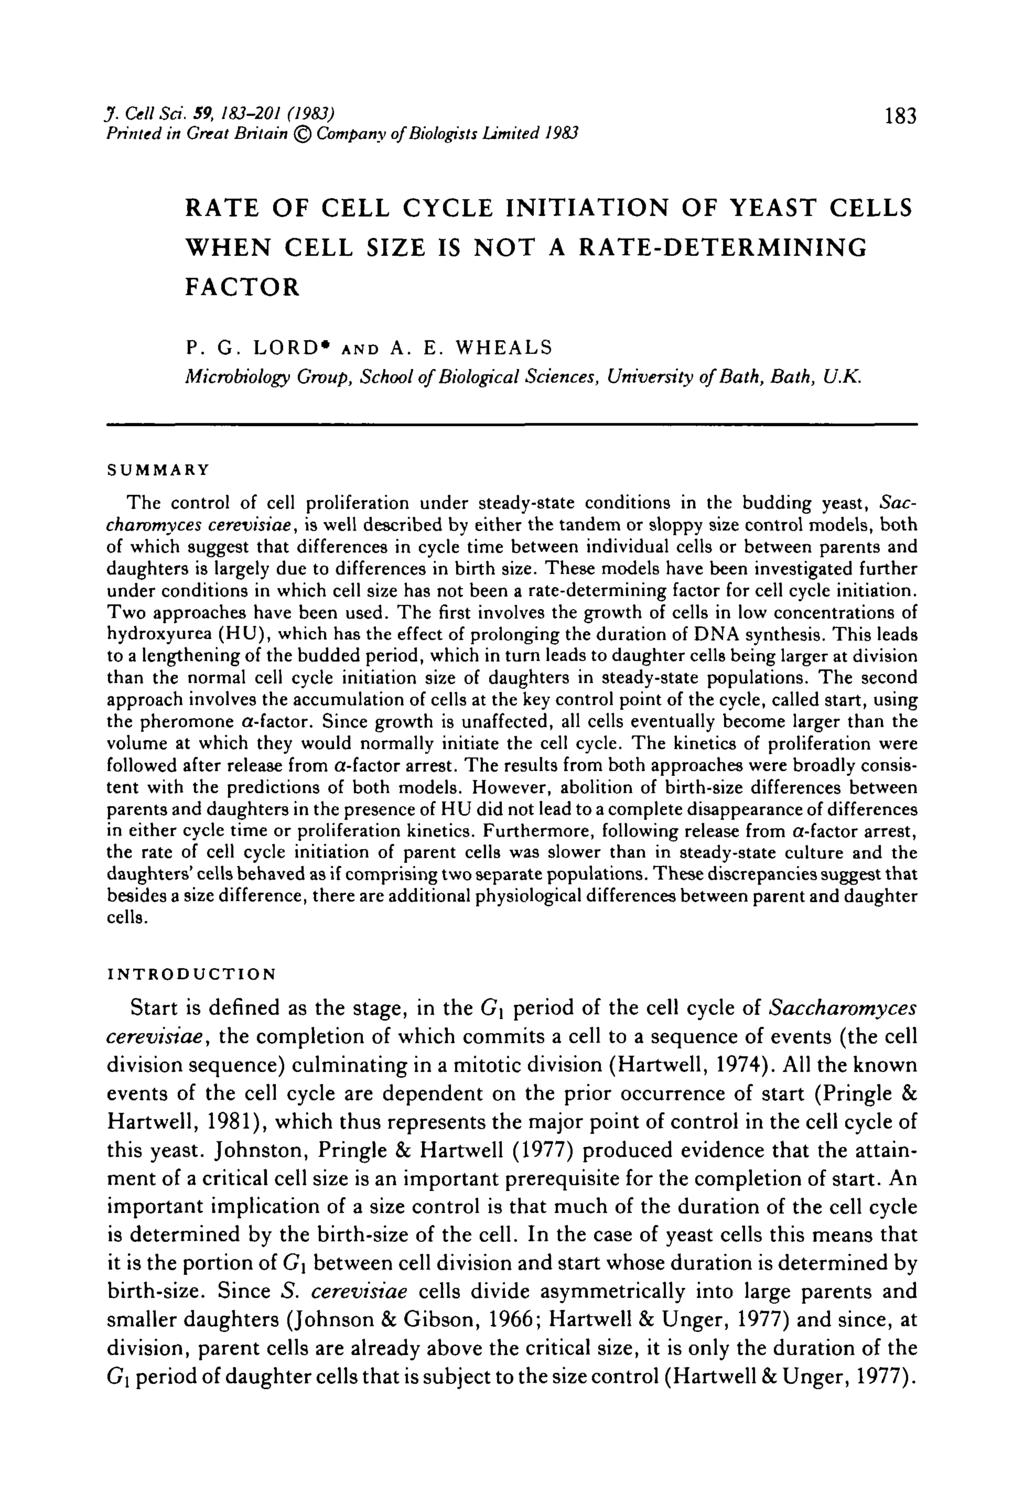 J. Cell Sci. 59, 183-21 (1983) 183 Printed in Great Britain Cmpany f Bilgists Limited 1983 RATE OF CELL CYCLE INITIATION OF YEAST CELLS WHEN CELL SIZE IS NOT A RATE-ETERMINING FACTOR P. G. LOR* AN A.